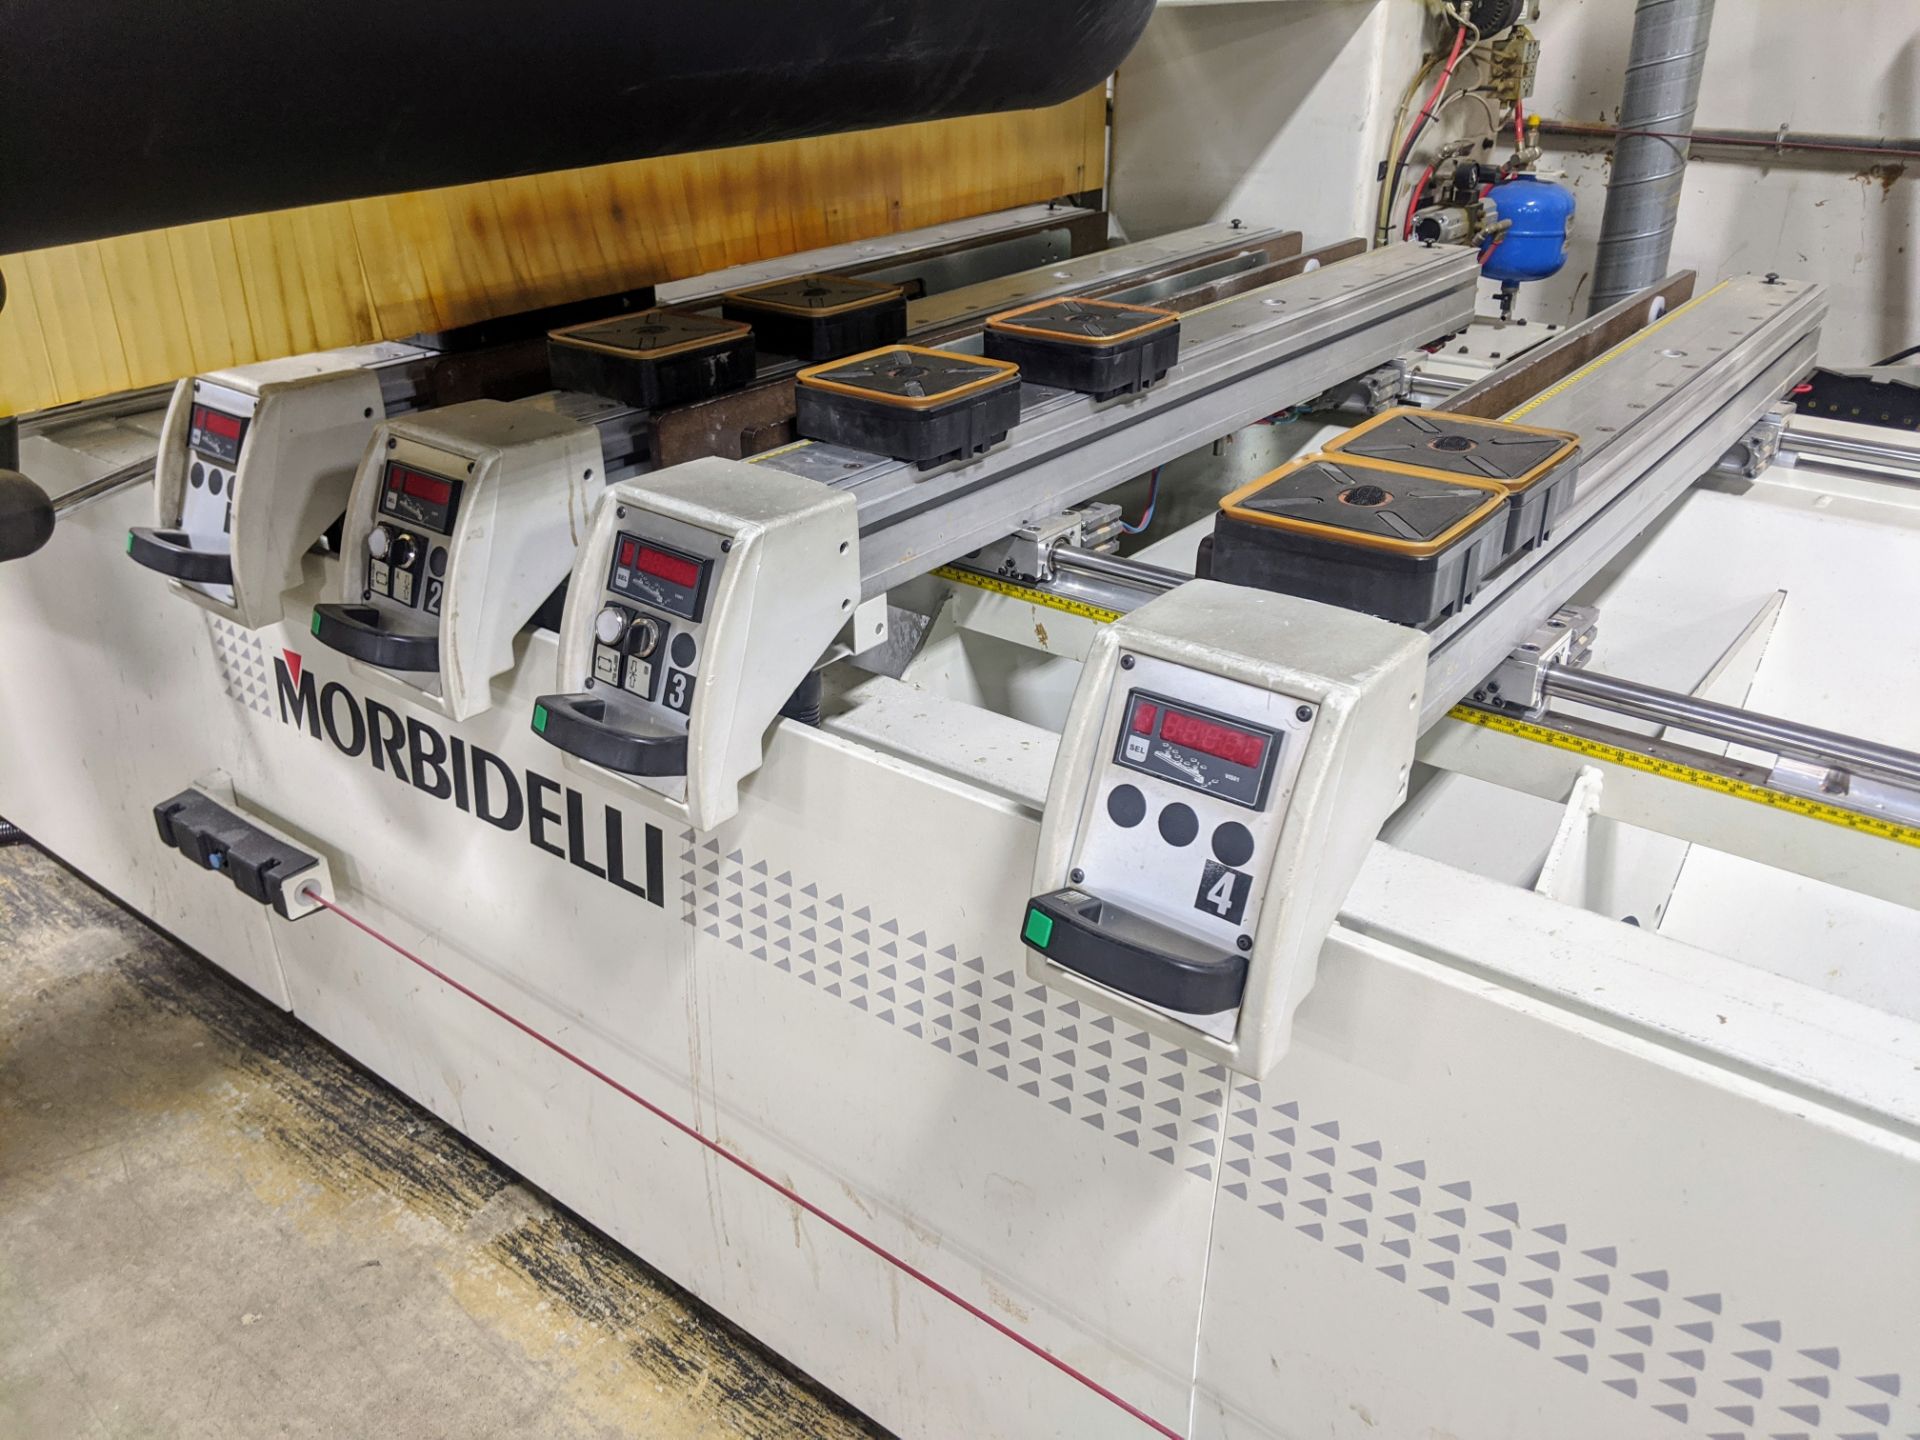 MORBIDELLI AUTHOR 644S MACHINING CENTER, S/N A4008248 W/PUMP, COOLING UNIT, PENDANT, TOOL HOLDERS - Image 17 of 18